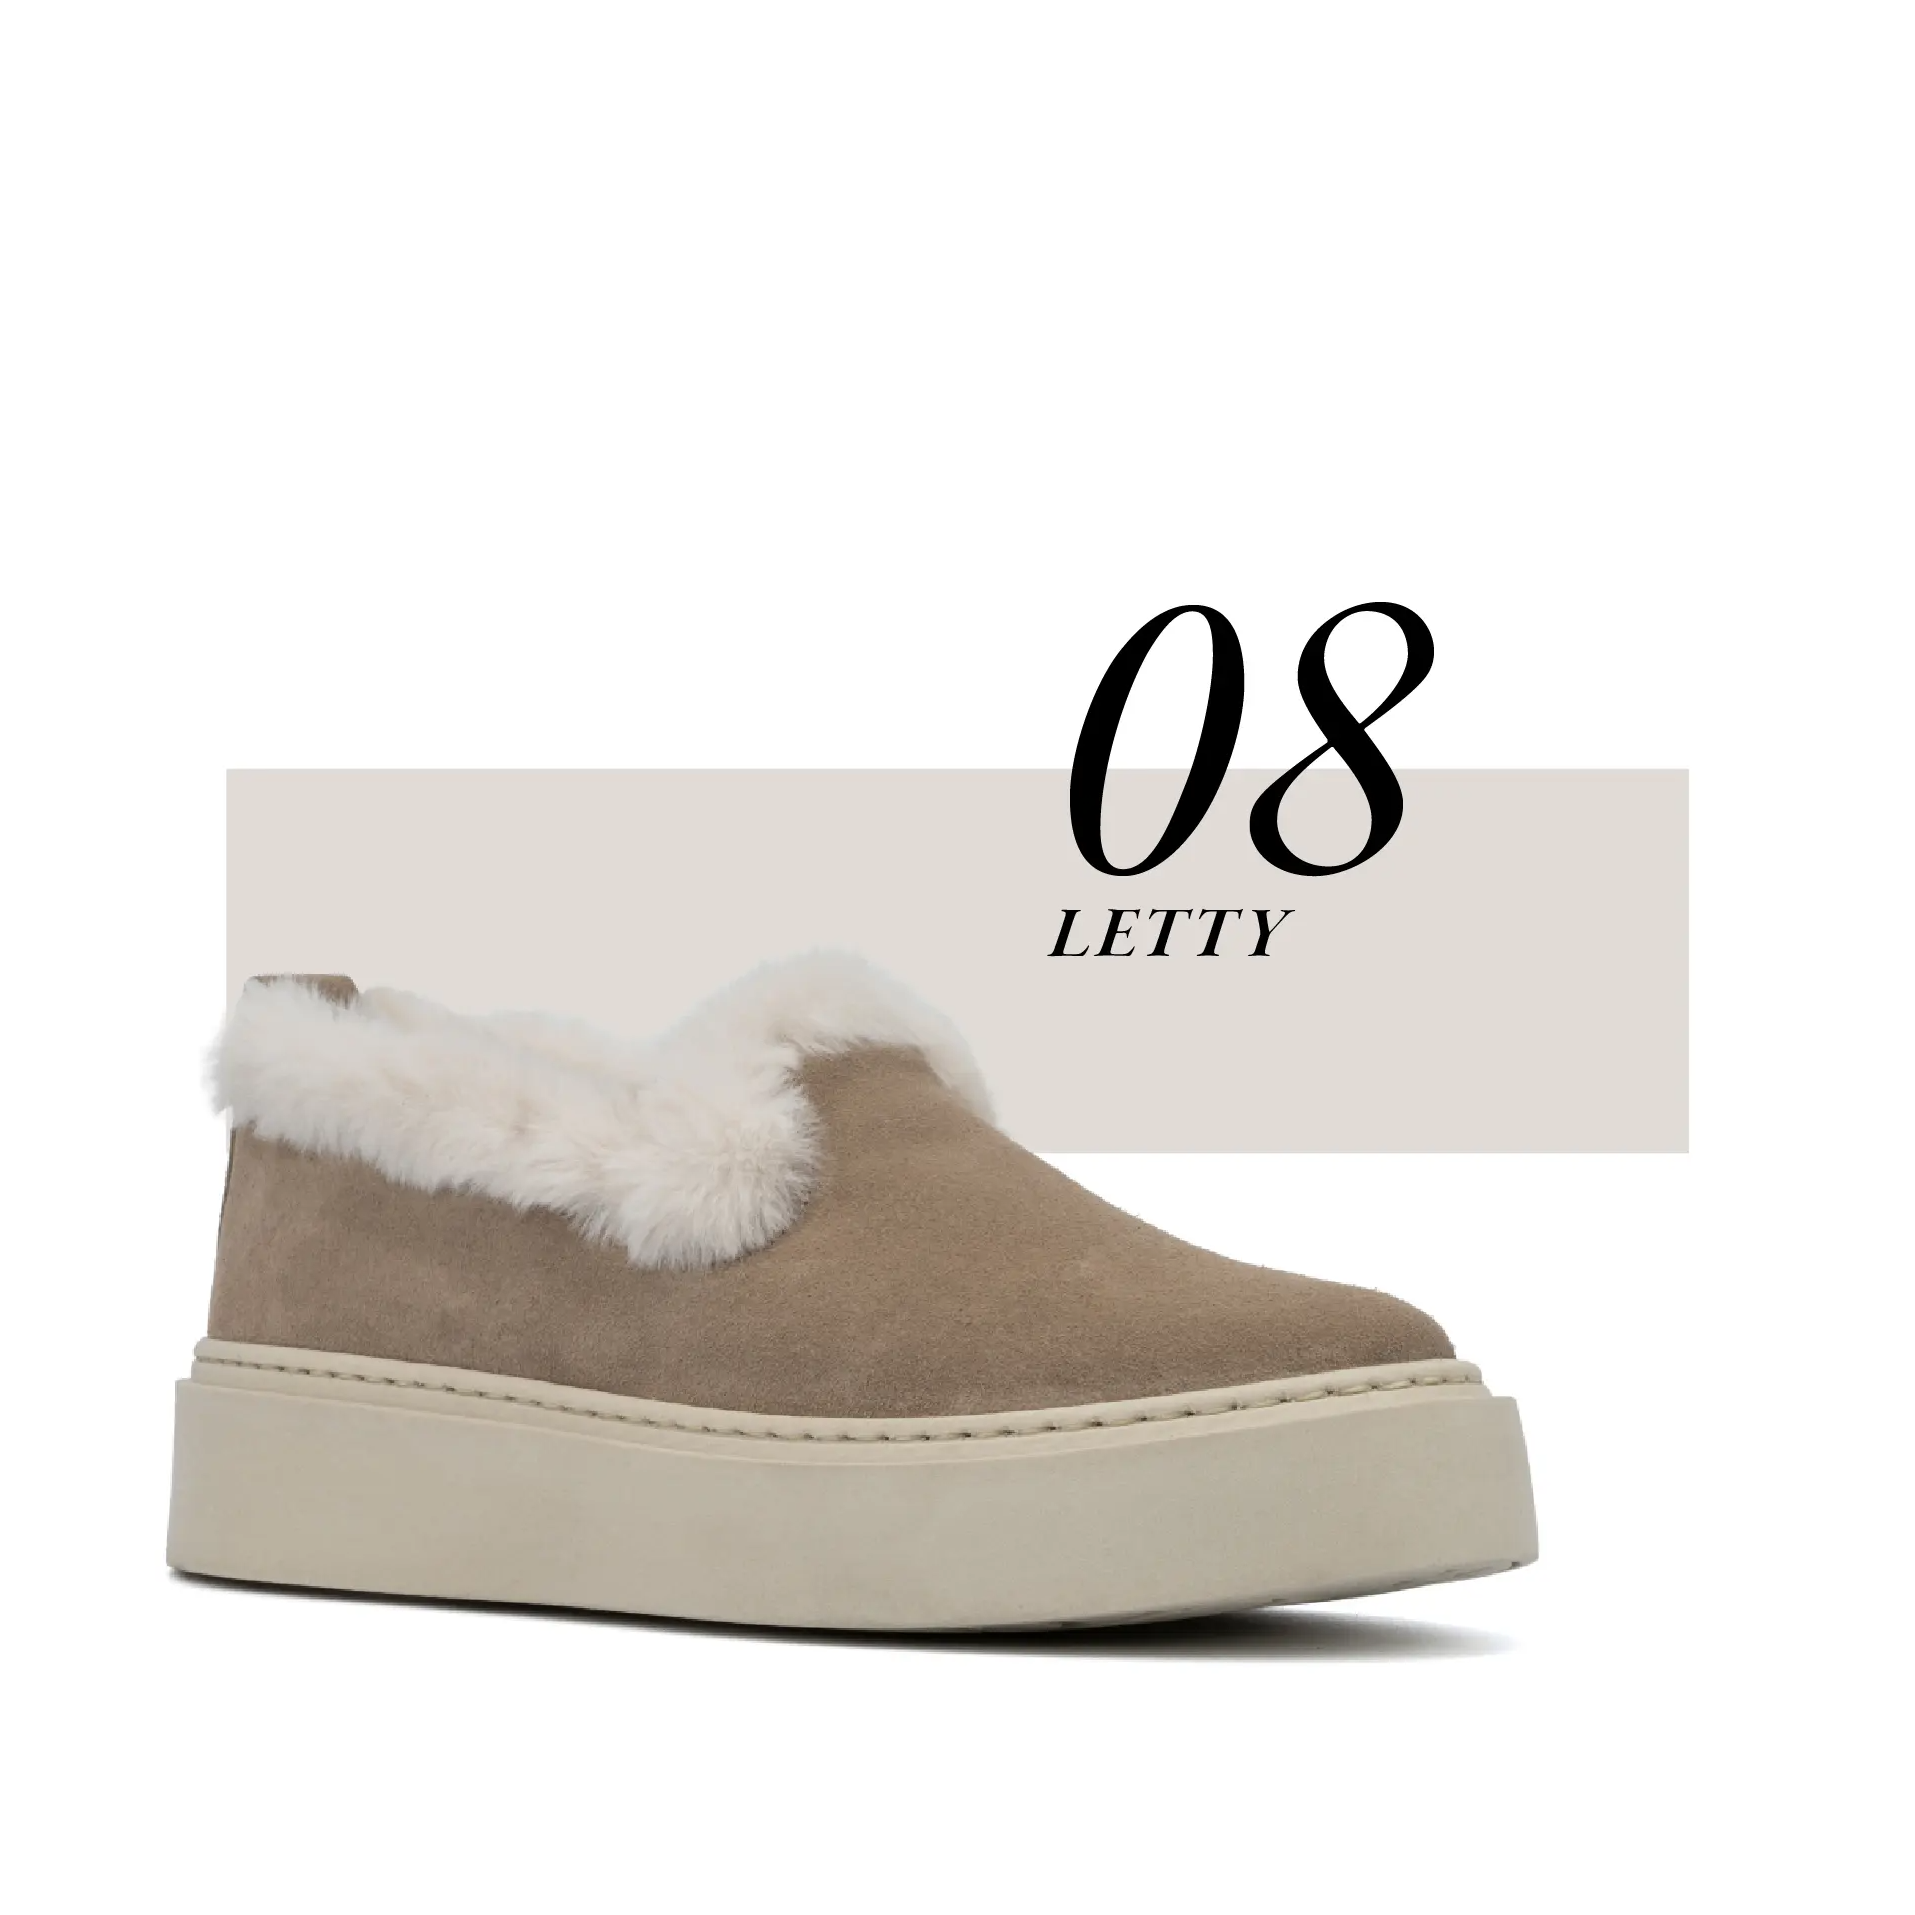 8: The Letty in Dark Taupe